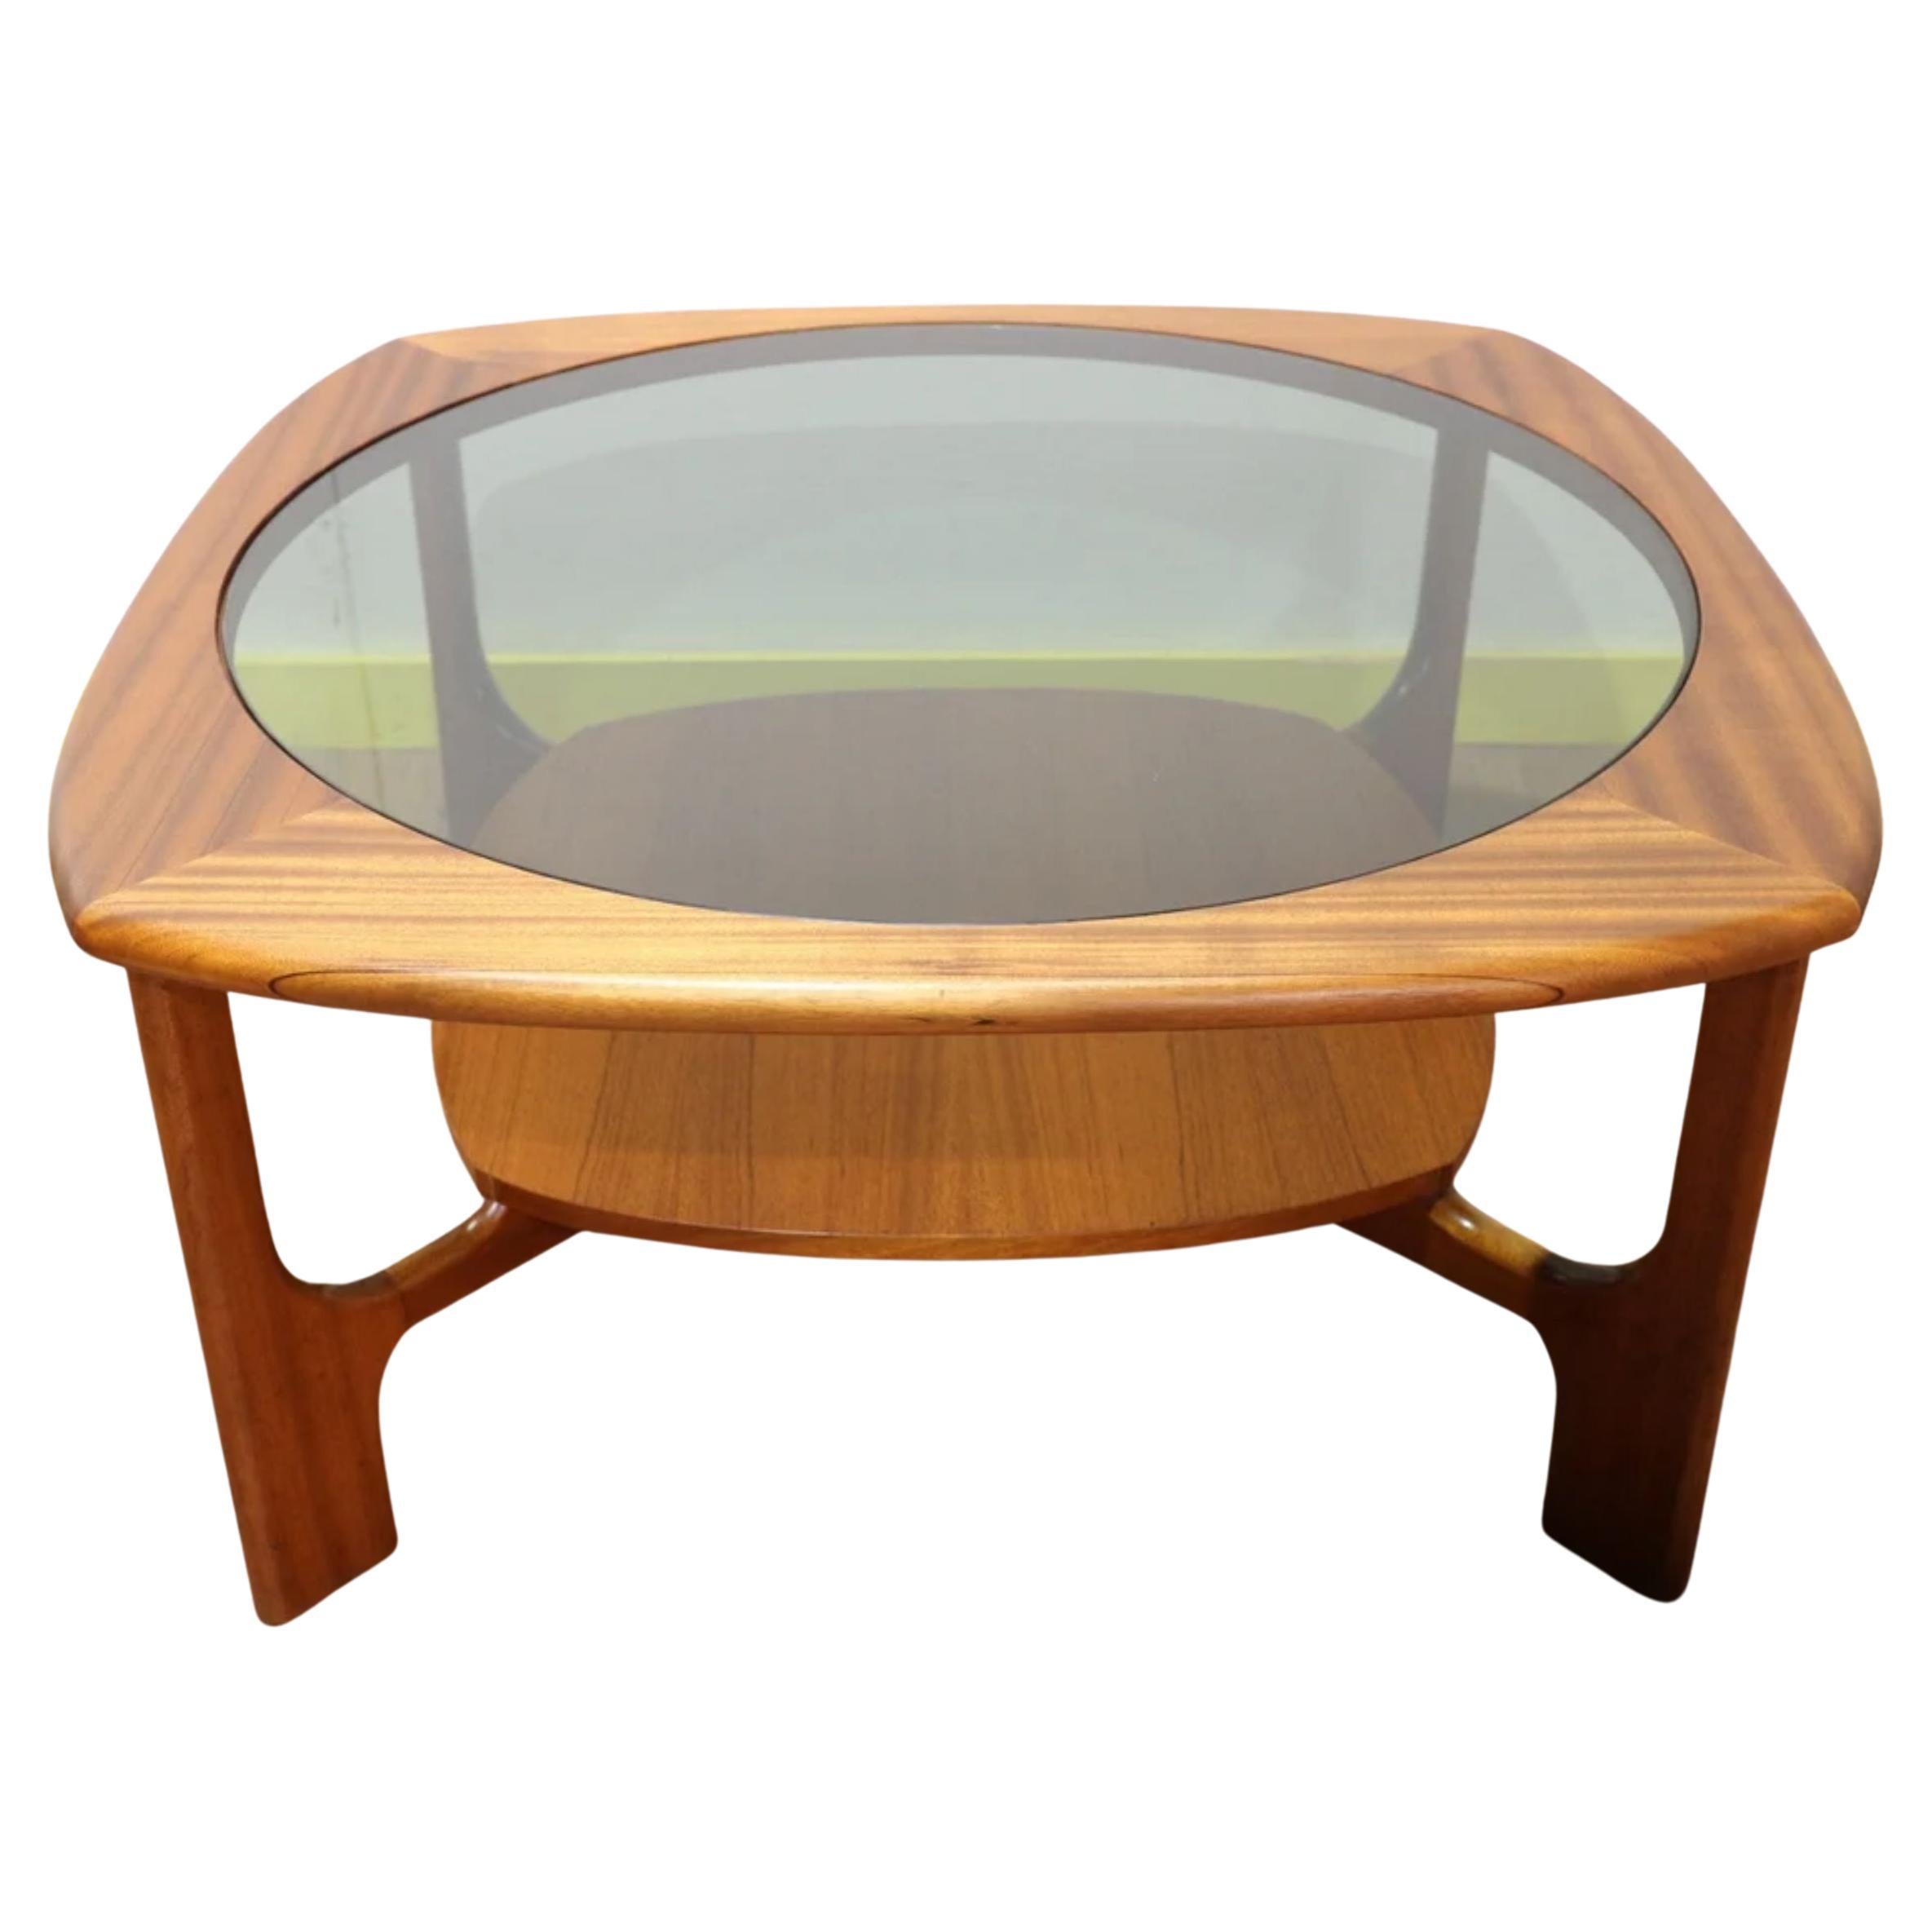 This Stateroom table from Stonehill is a mid century classic, made from solid teak. It features a refined and sculptural base that arches up to elevate a circular top with glass insert. This beautiful retro design is a must have in any modern